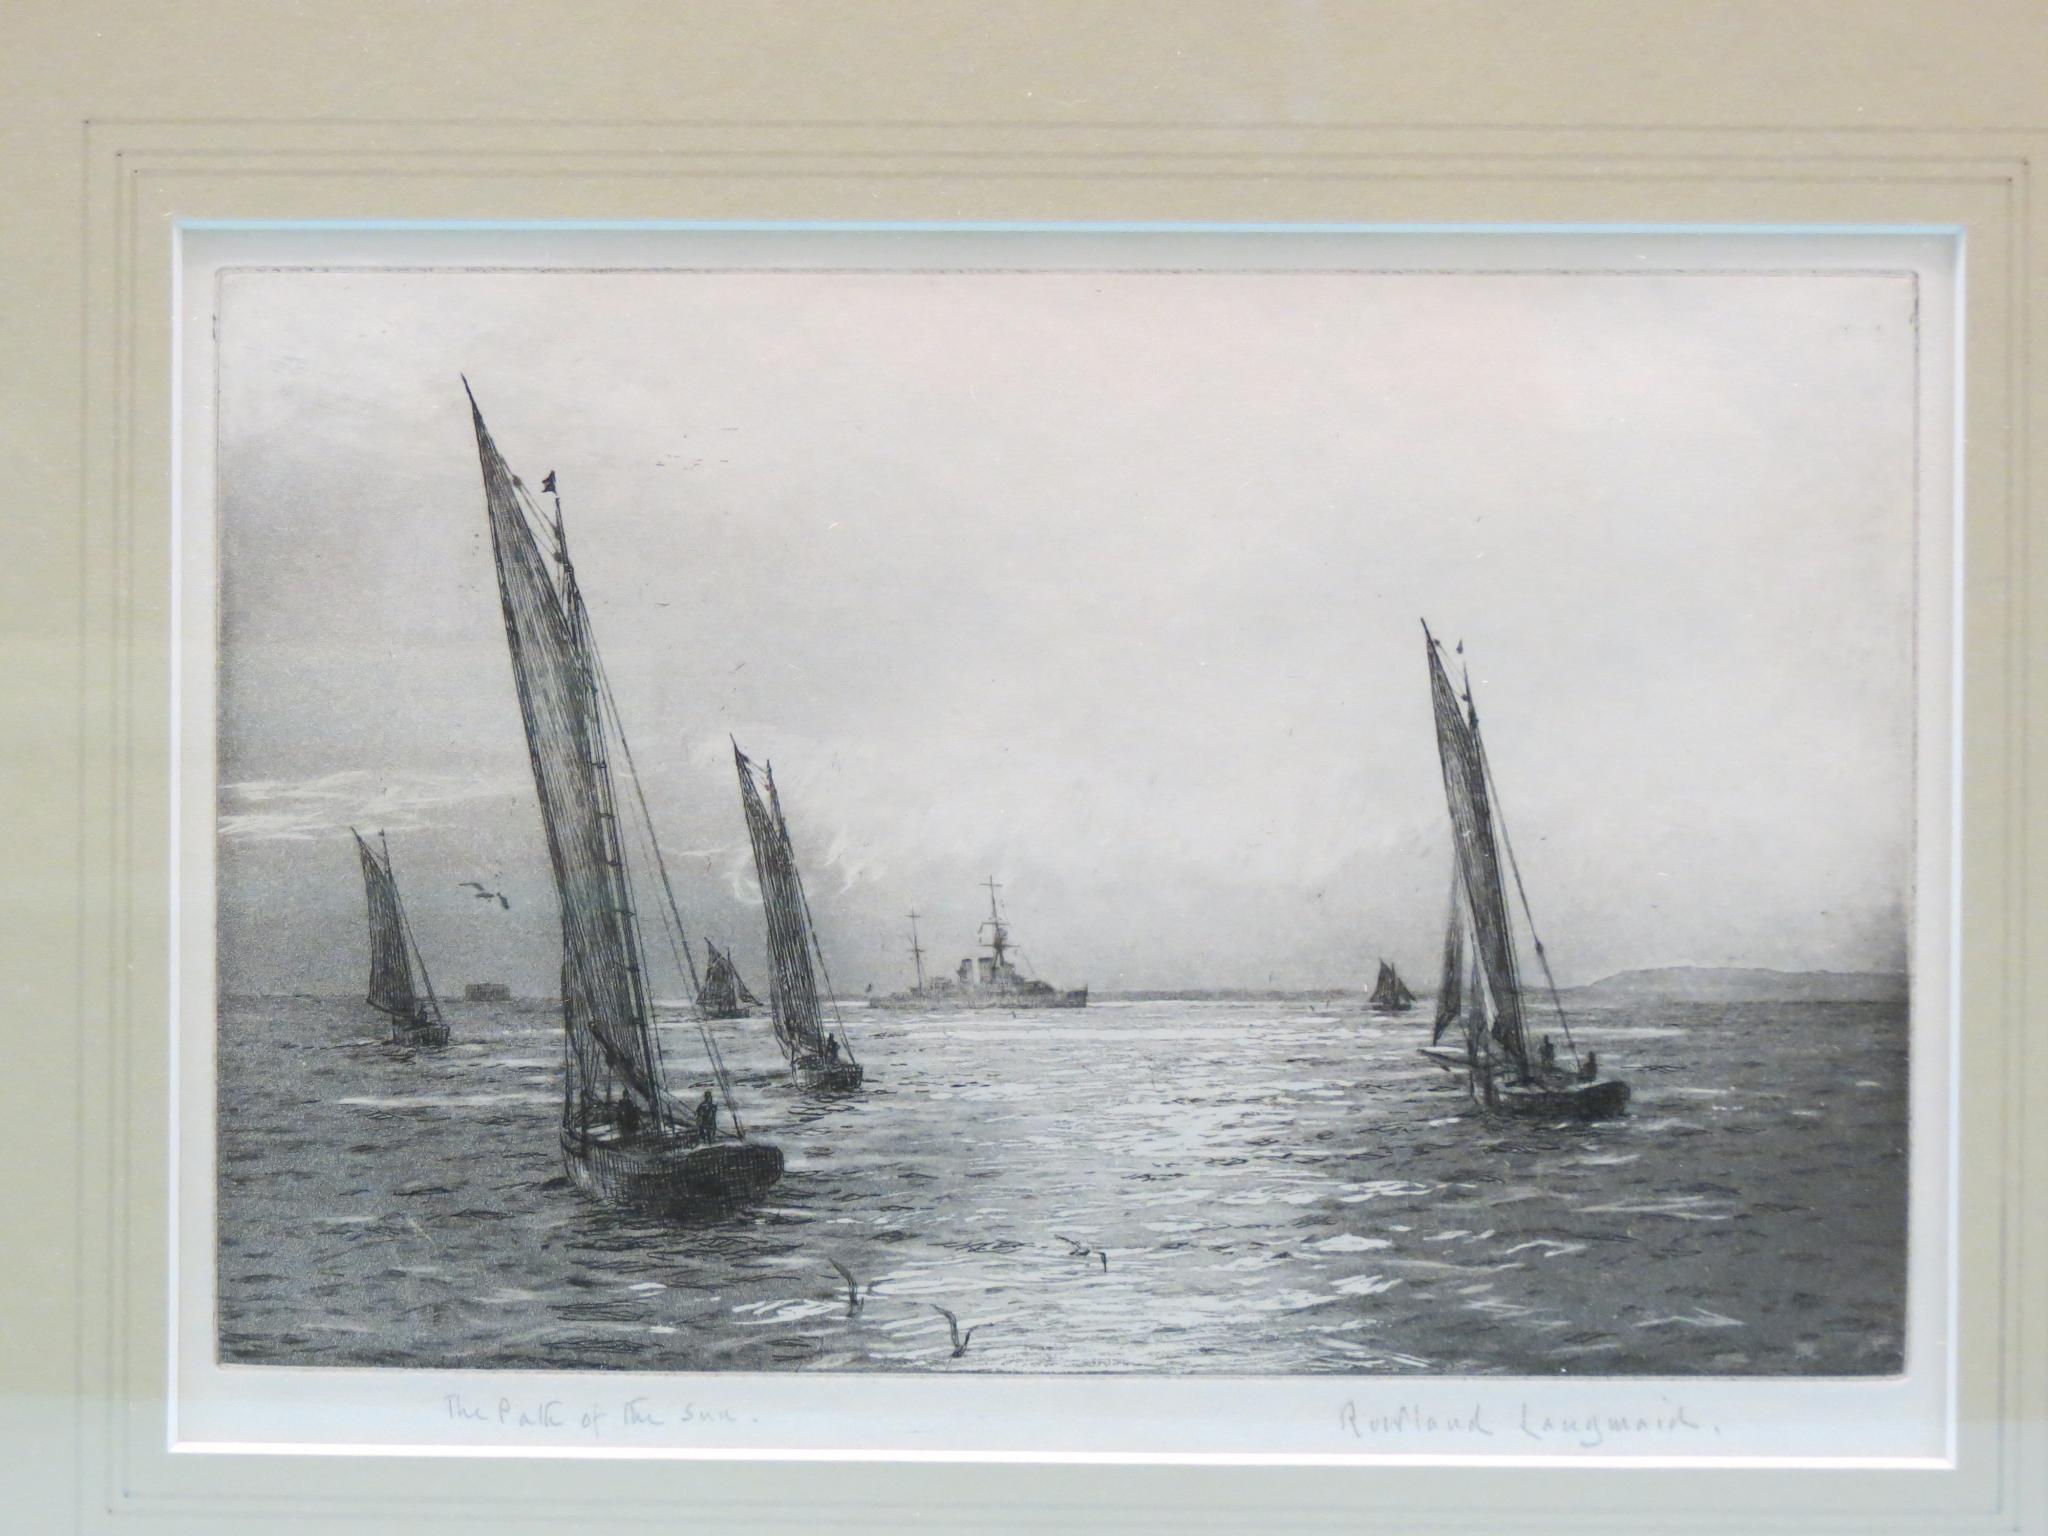 Rowland Langmaid - marine etching, entitled The Path of the Sea, signed in pencil on mount, 5.5 x